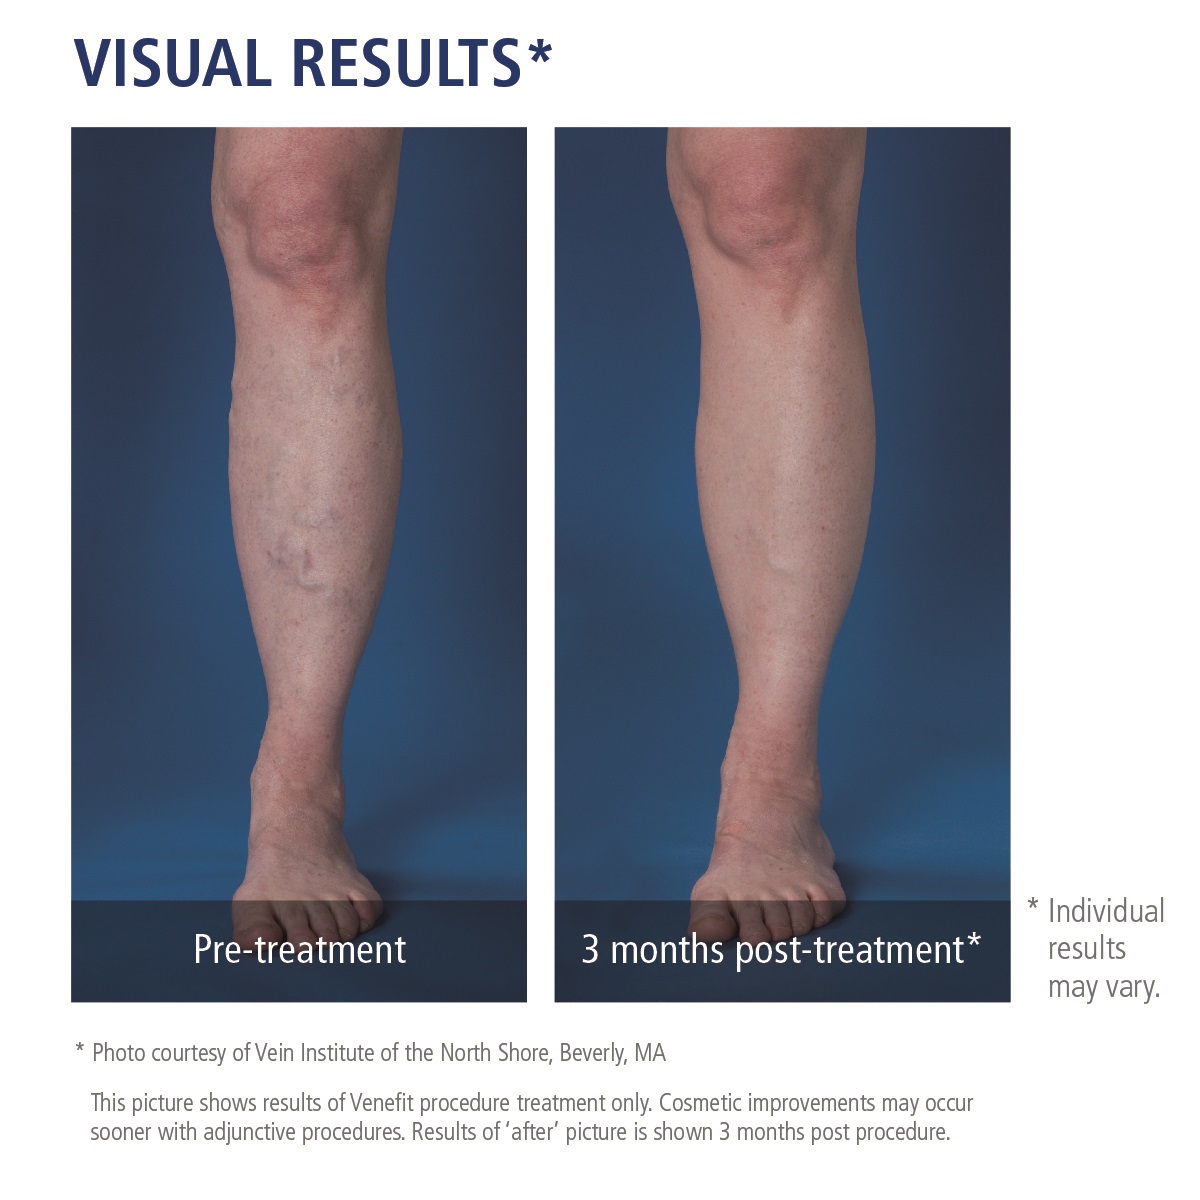 Varicose Veins & Chronic Venous Insufficiency treated gently